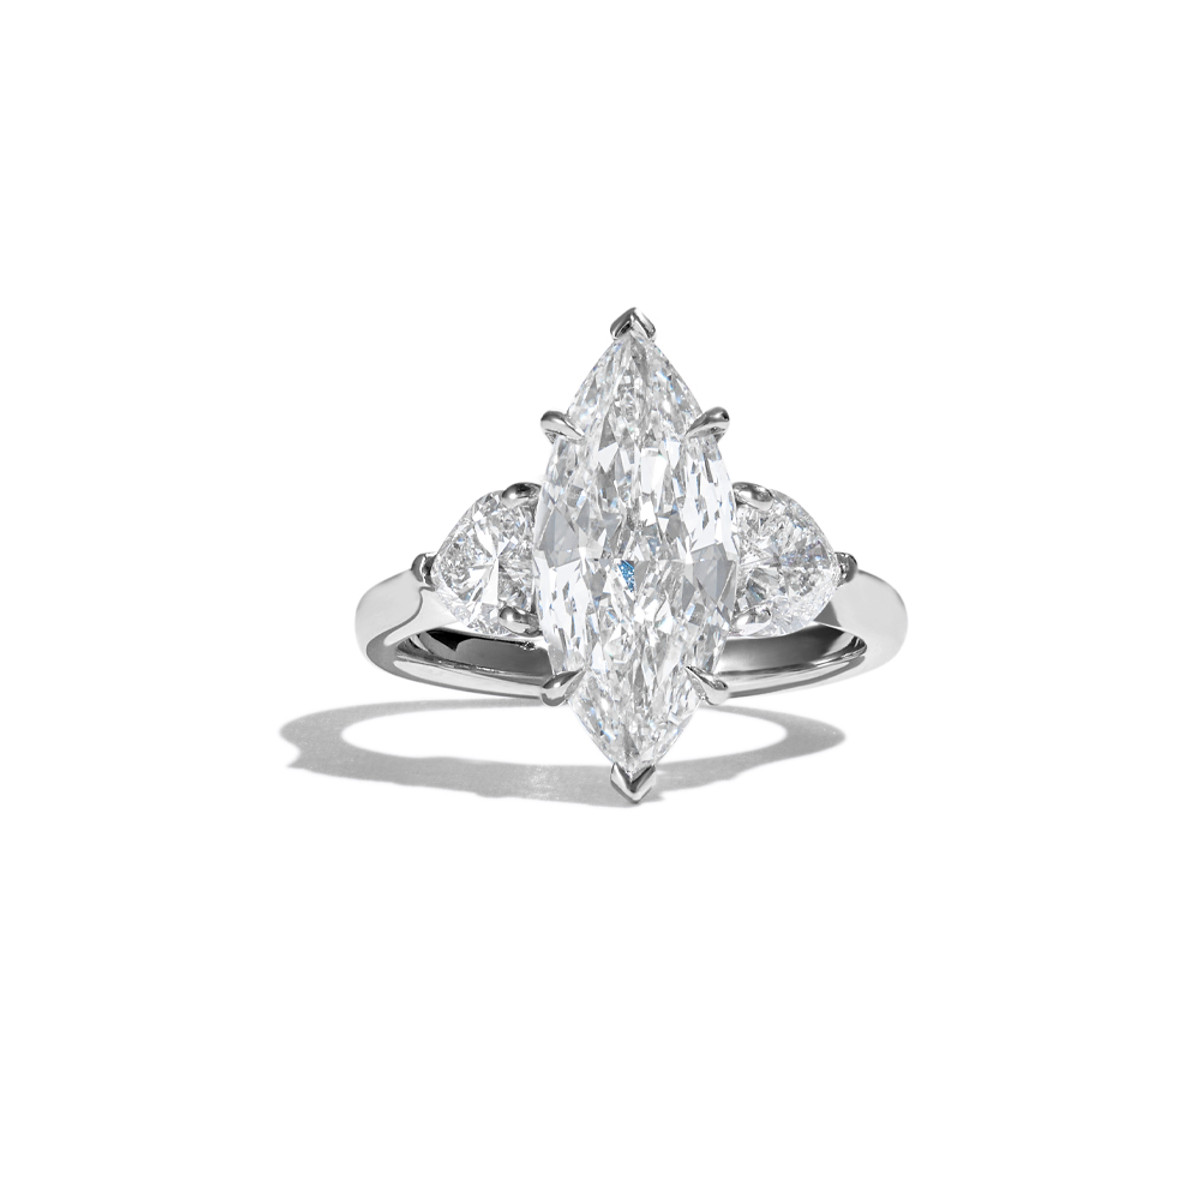 Hyde Park Platinum 3.02ct Marquise and Round Three-Stone Engagement Ring-49026 Product Image